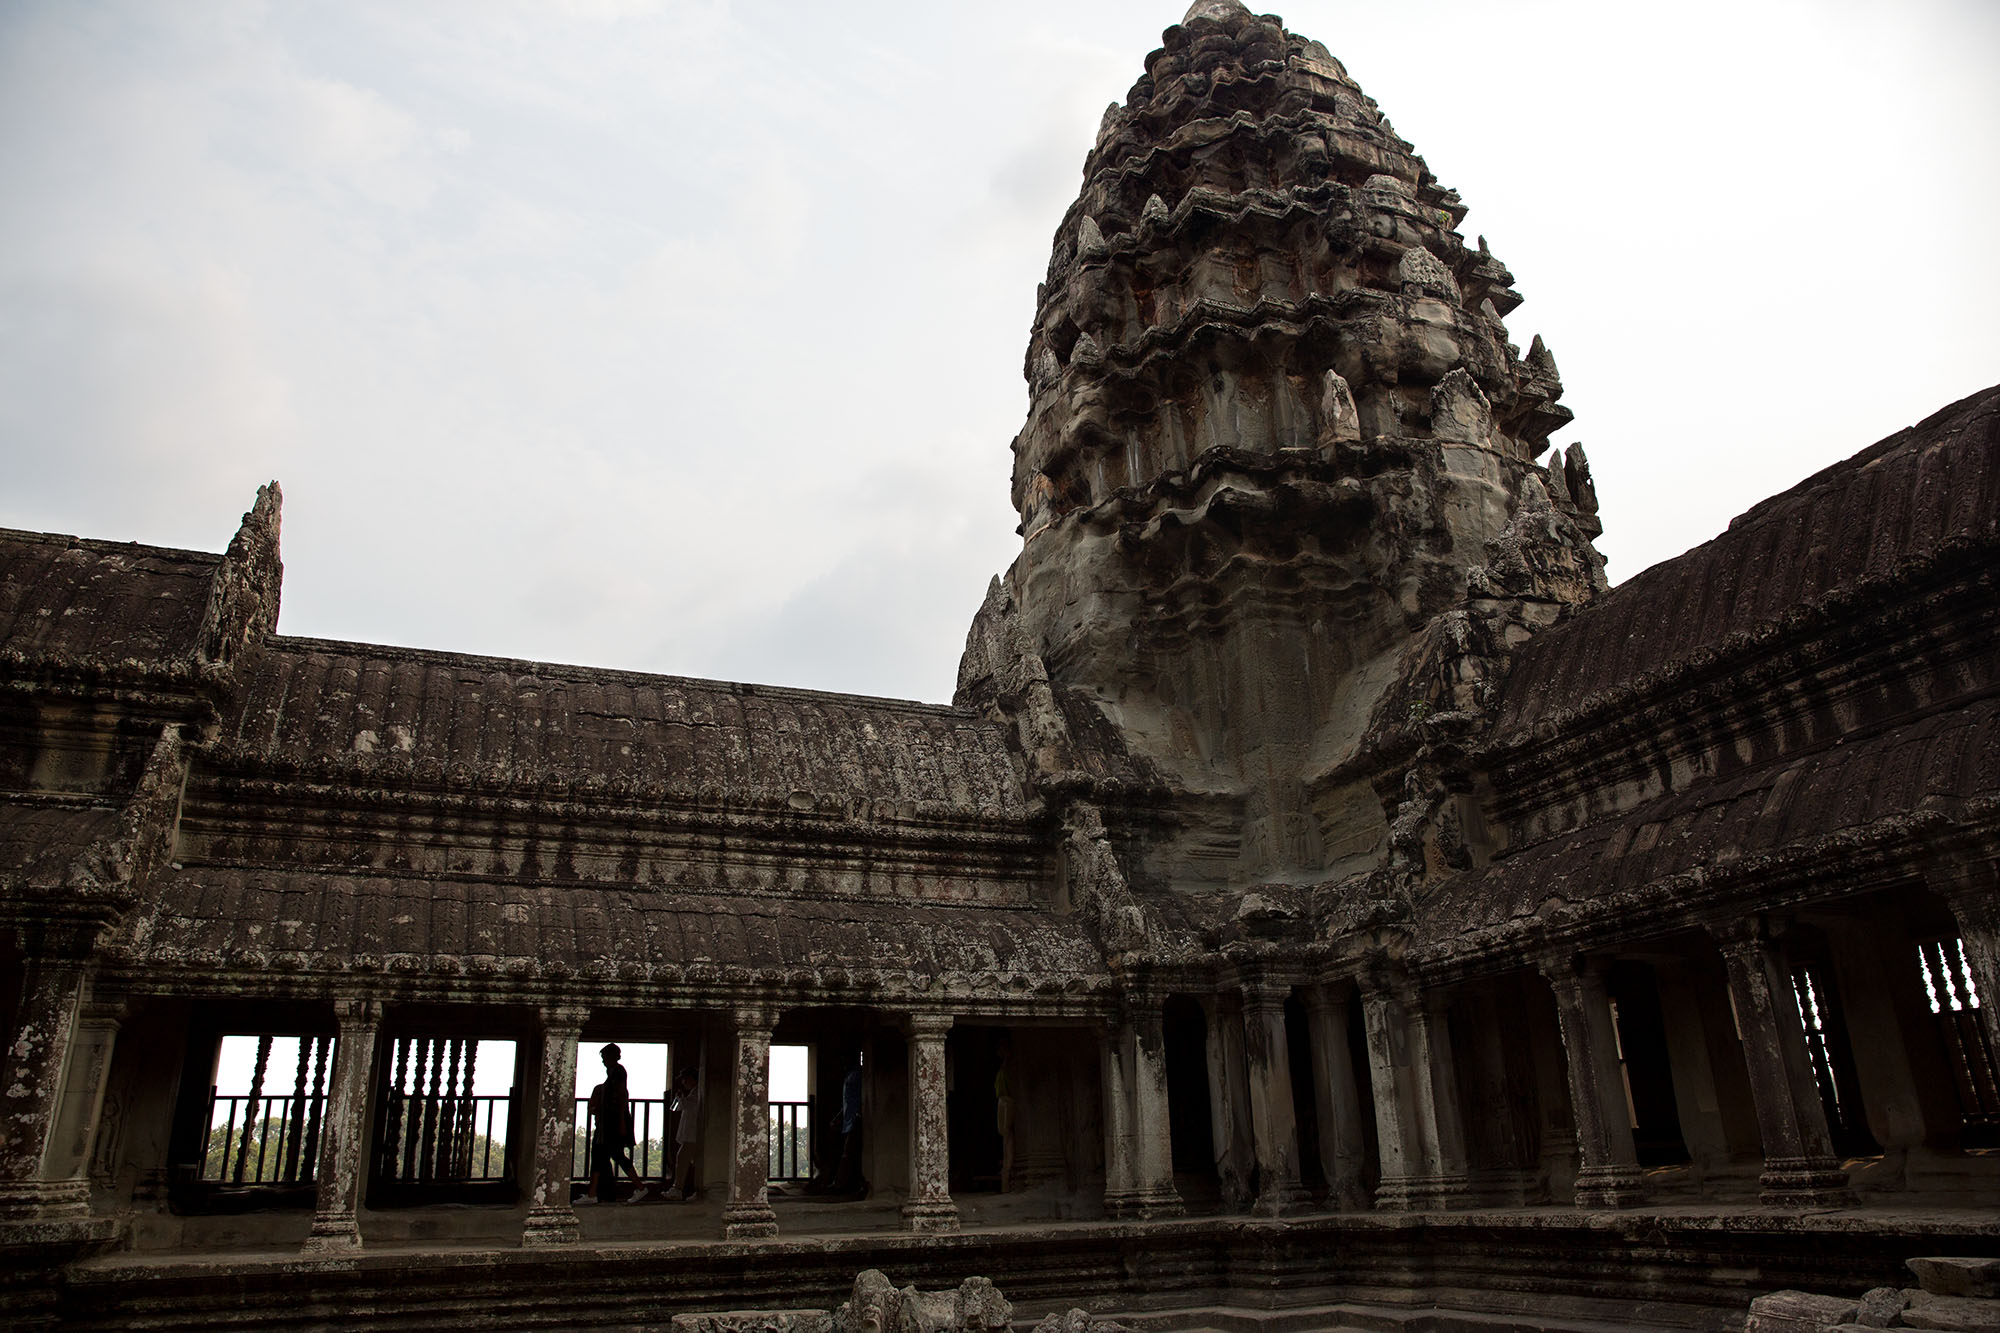 The First Lady is silhouetted among Angkor Wat's columns. (Official White House Photo by Amanda Lucidon)